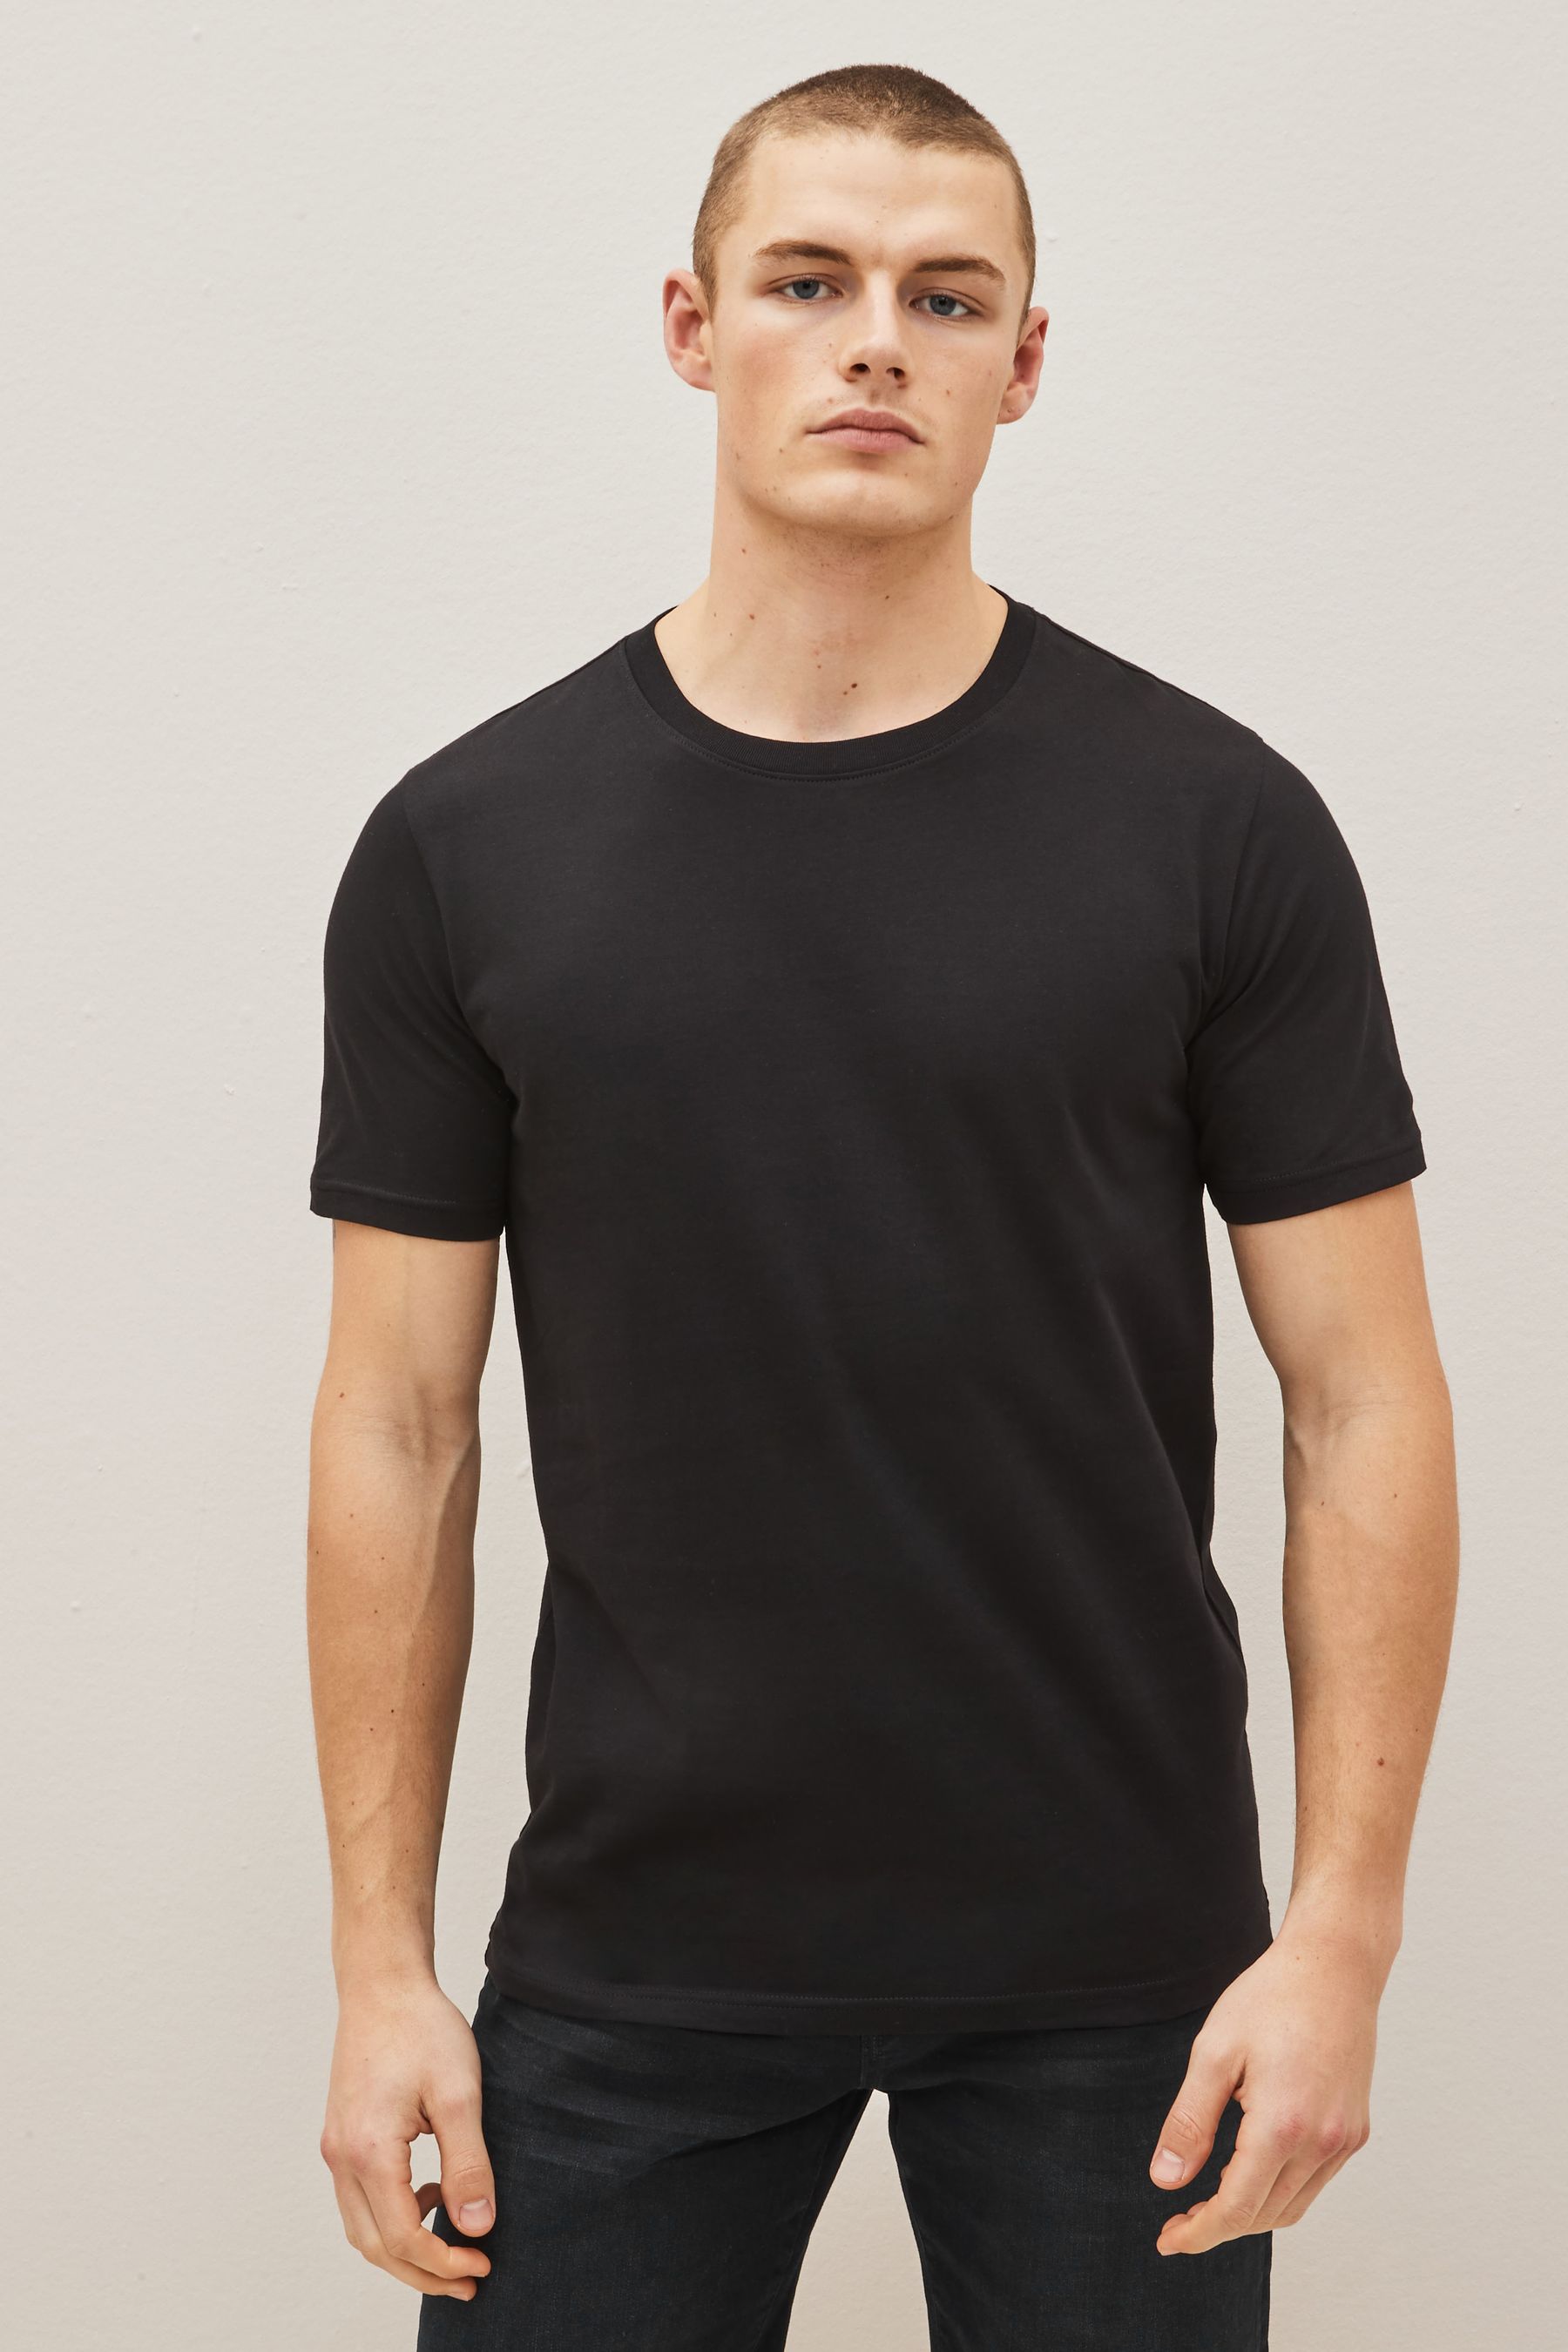 Buy Black/Slate/Grey Marl/White/Navy/Blue Slim T-Shirts 6 Pack from the ...